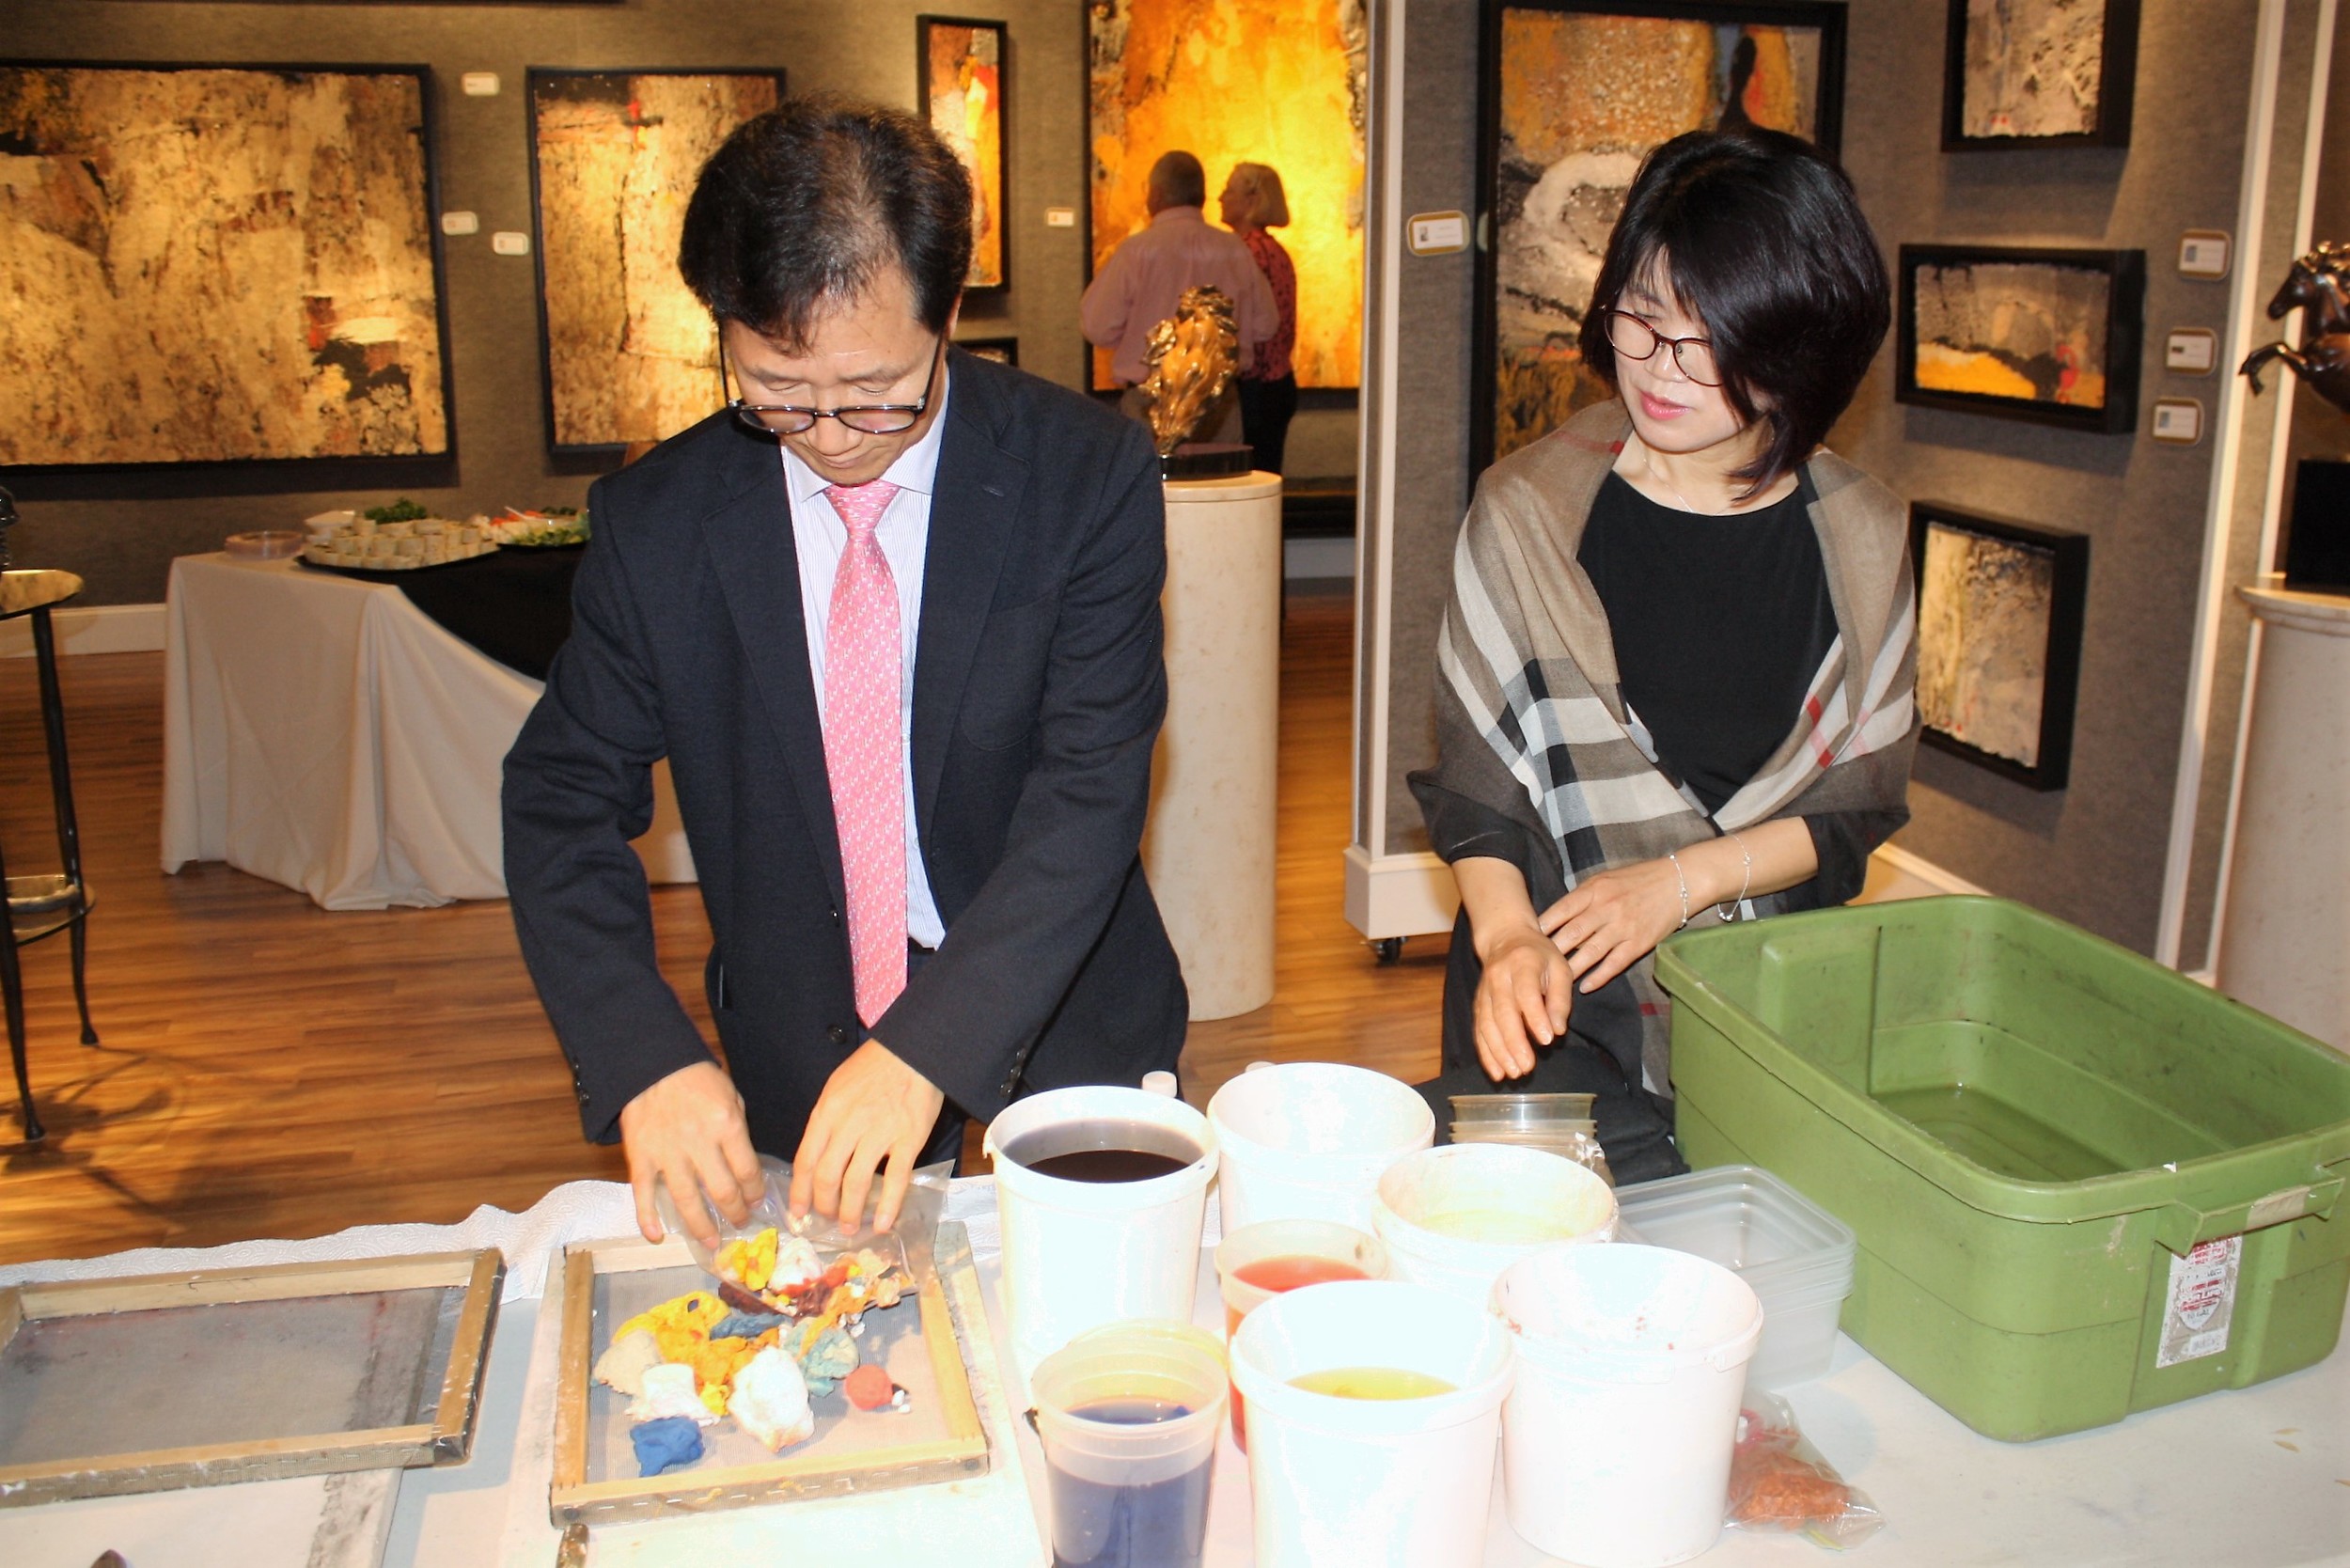 Artists Jeong and Choon Yun display some of their handmade paper tapestries at Cutter & Cutter Fine Art in Sawgrass Village.